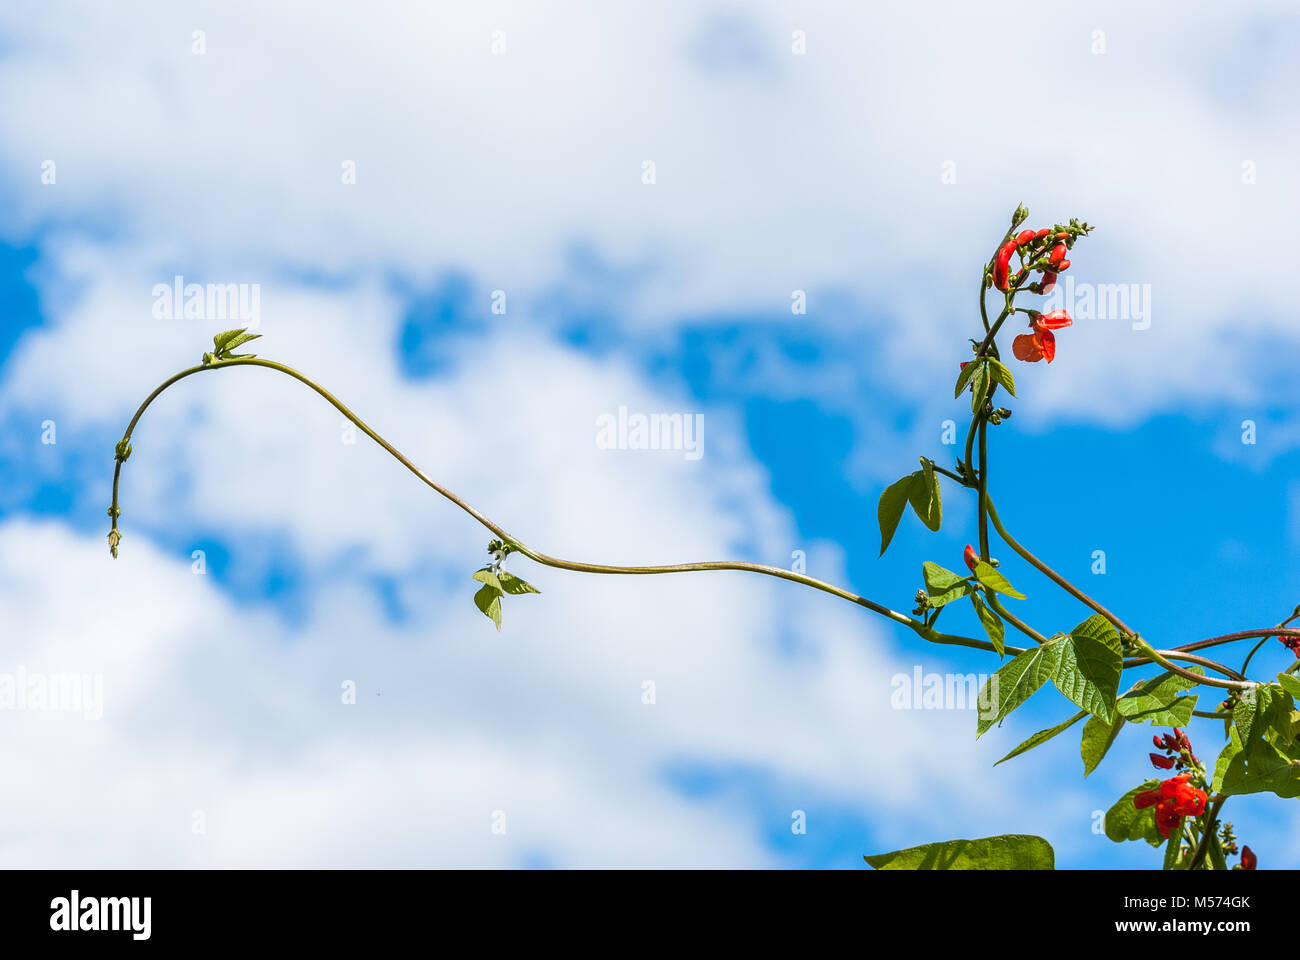 Growing Runner Bean Stalk with developing flowers against a blue sky. Stock Photo